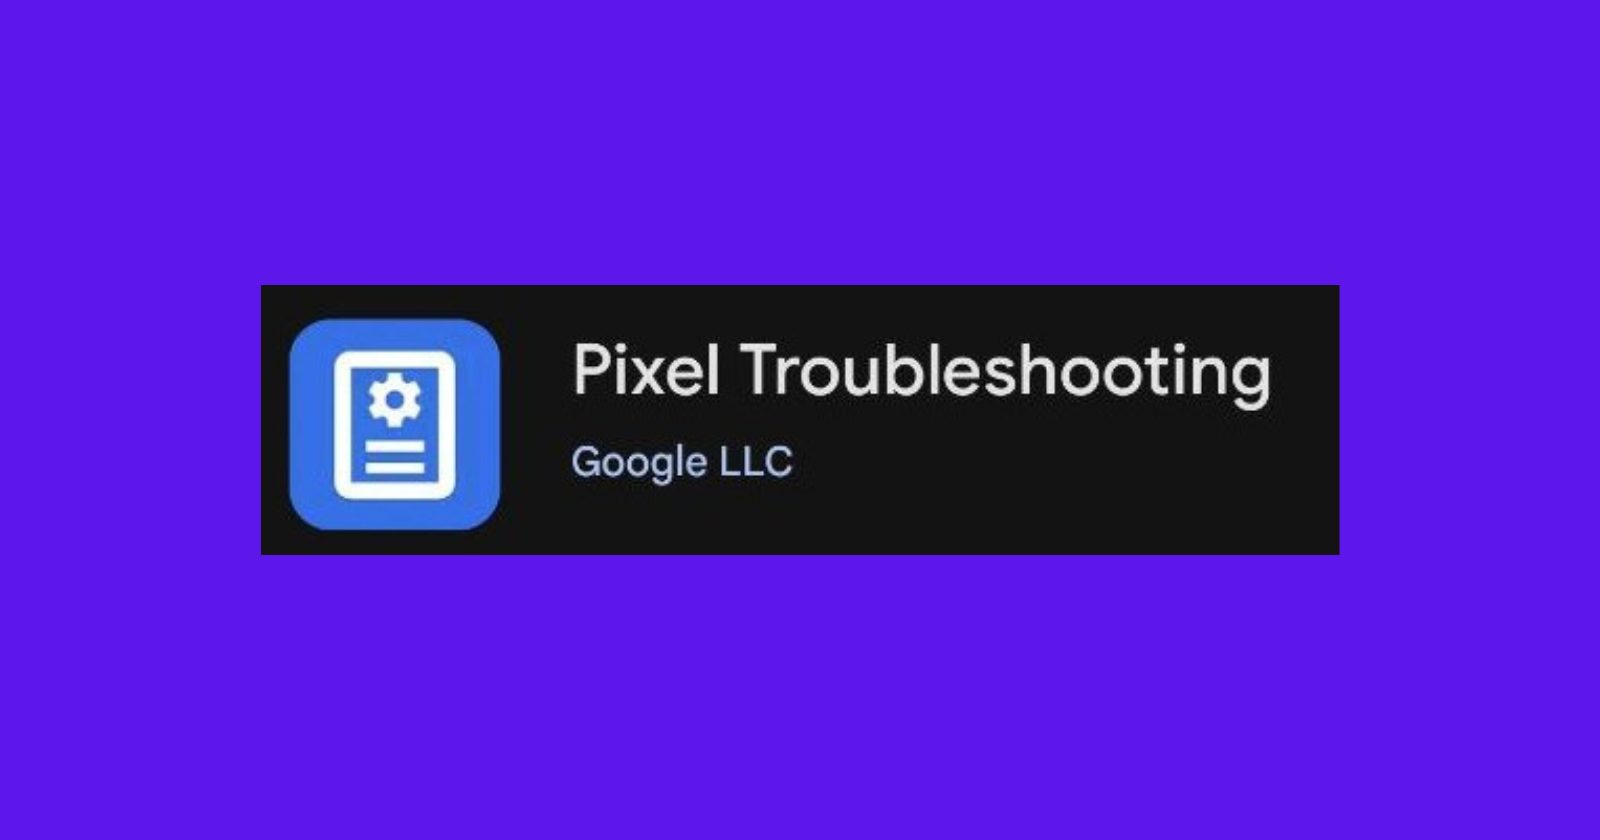 How to use Google 'Pixel Troubleshooting' app to diagnose and resolve phone overheating issues